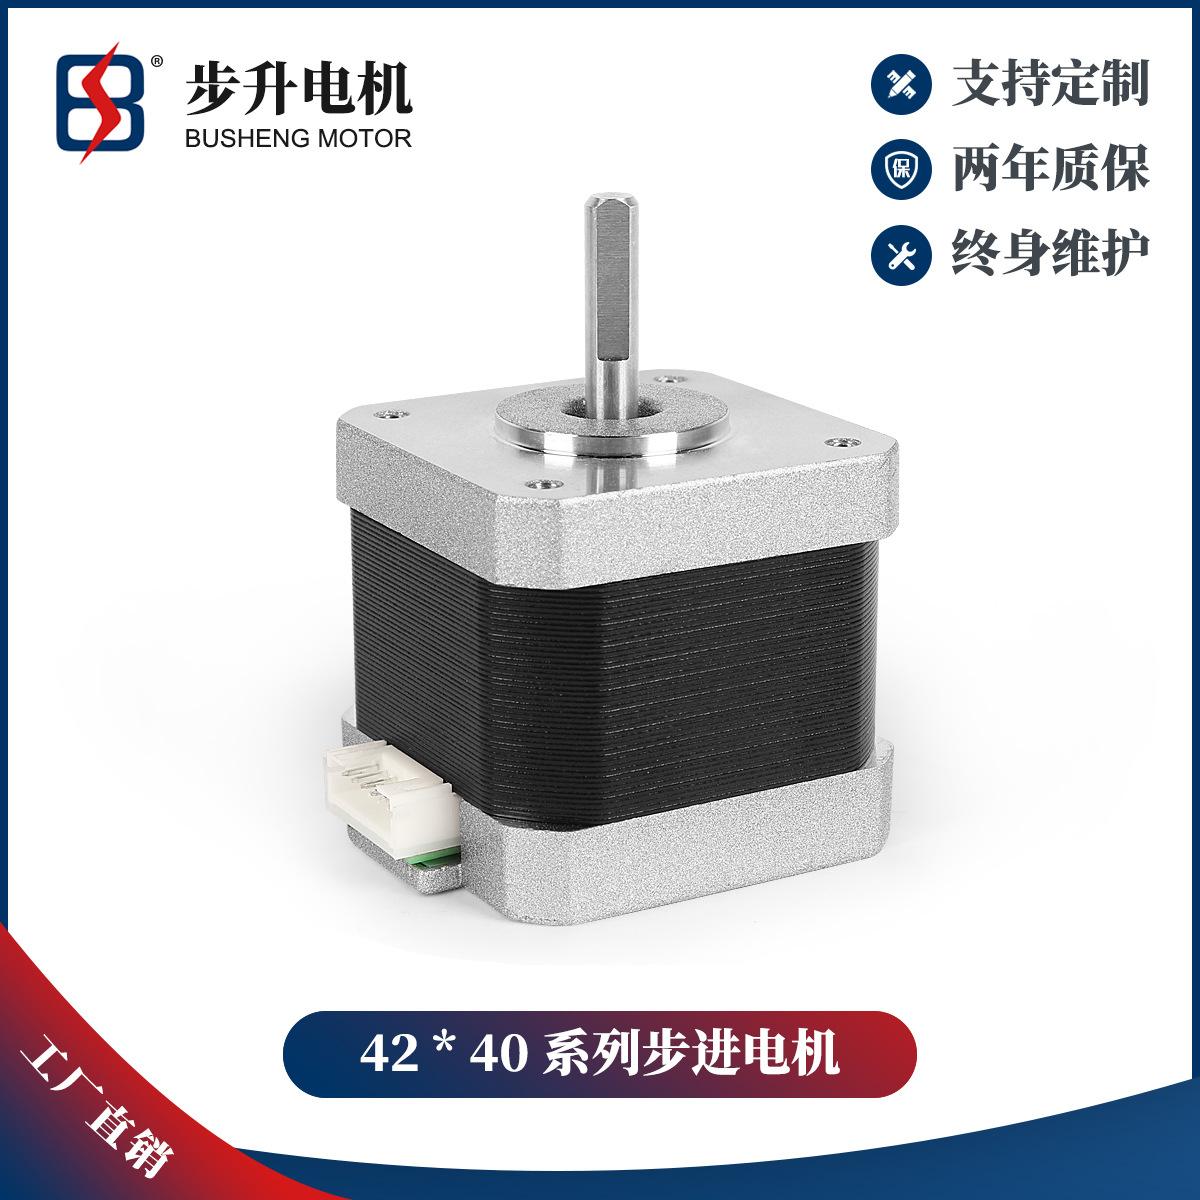  42 stepper motor 40 body large torque industrial automation stage lighting DC brushless motor